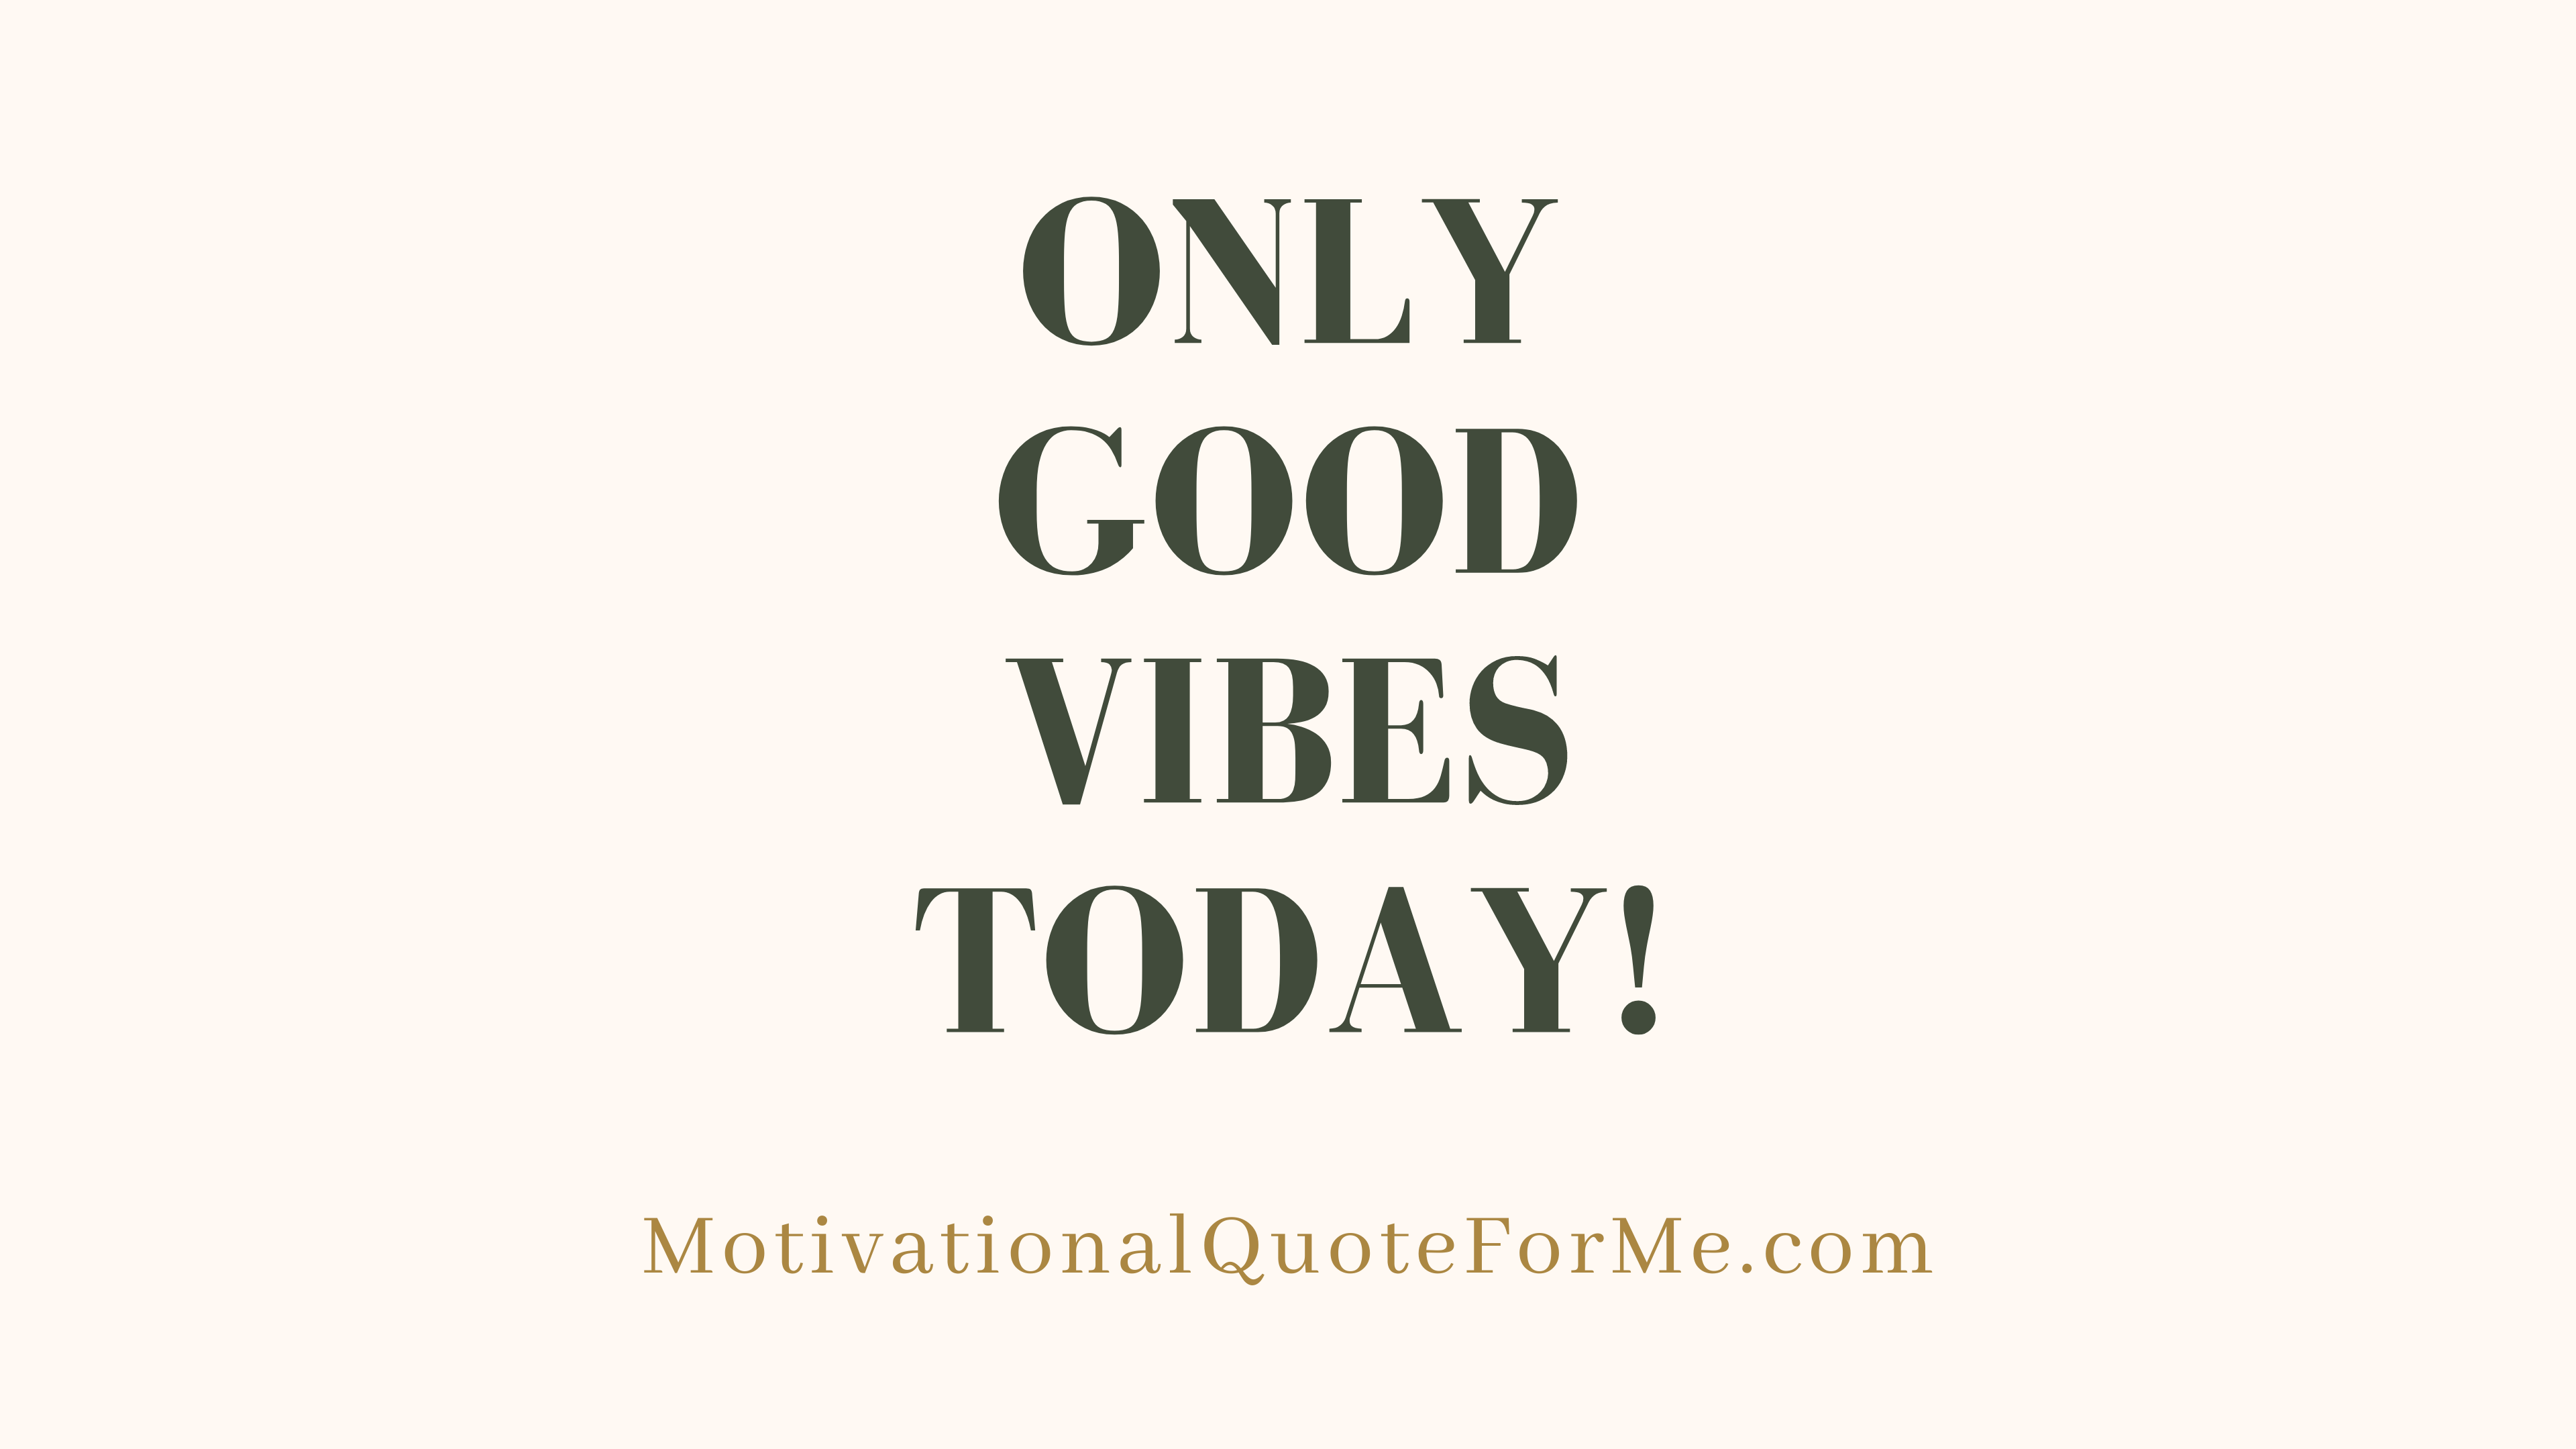 Only Good Vibes Today! Quote For Me